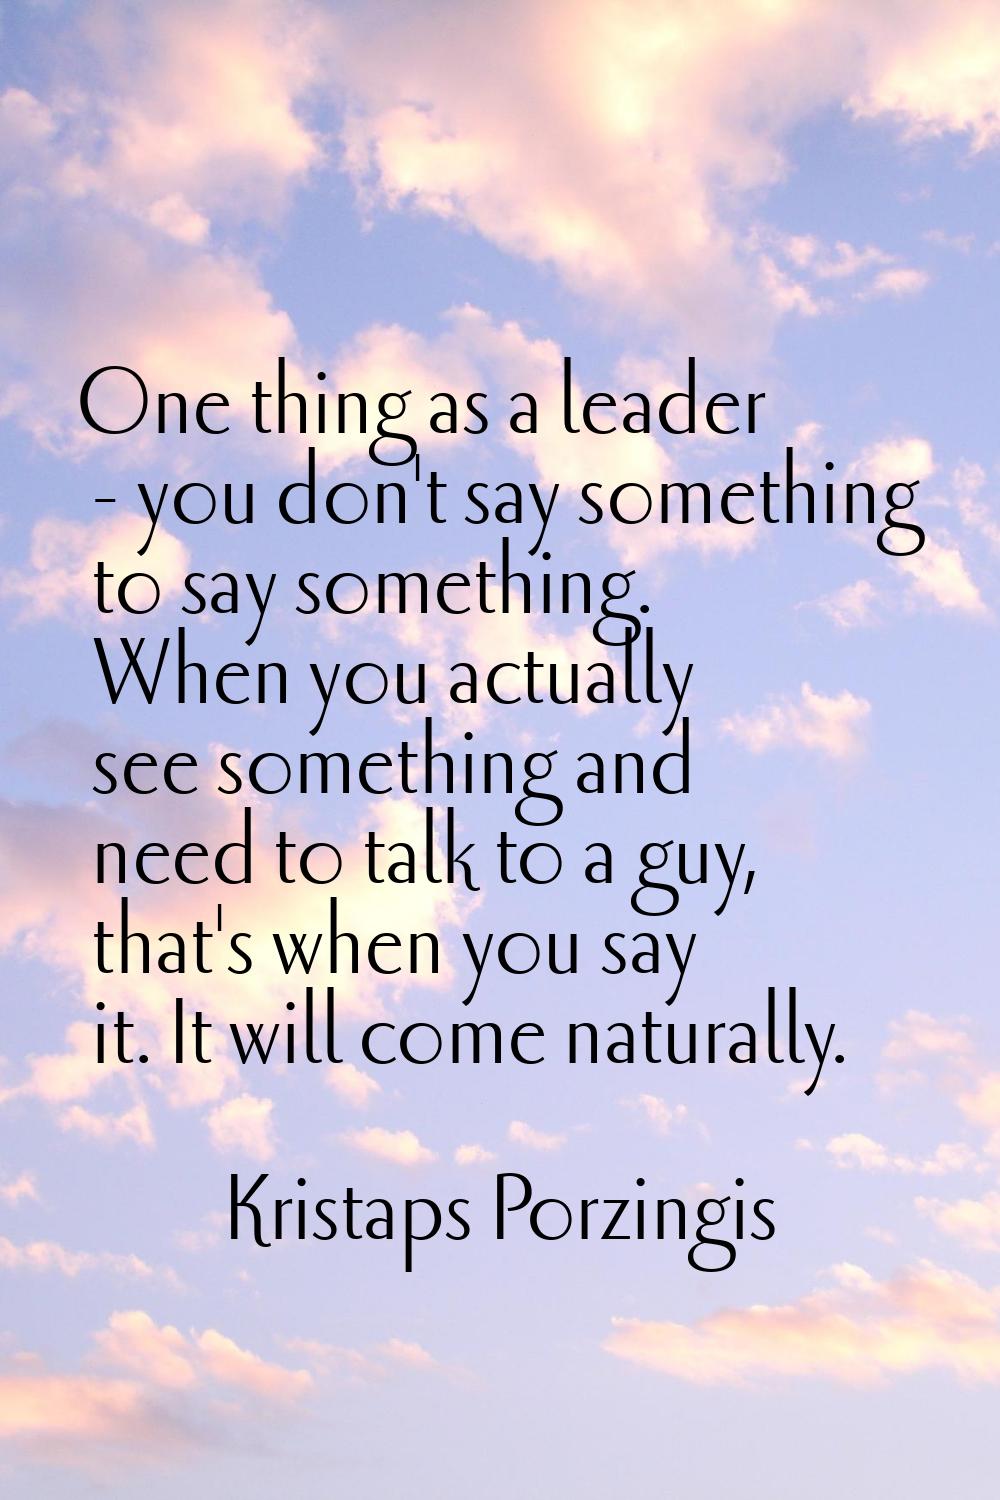 One thing as a leader - you don't say something to say something. When you actually see something a